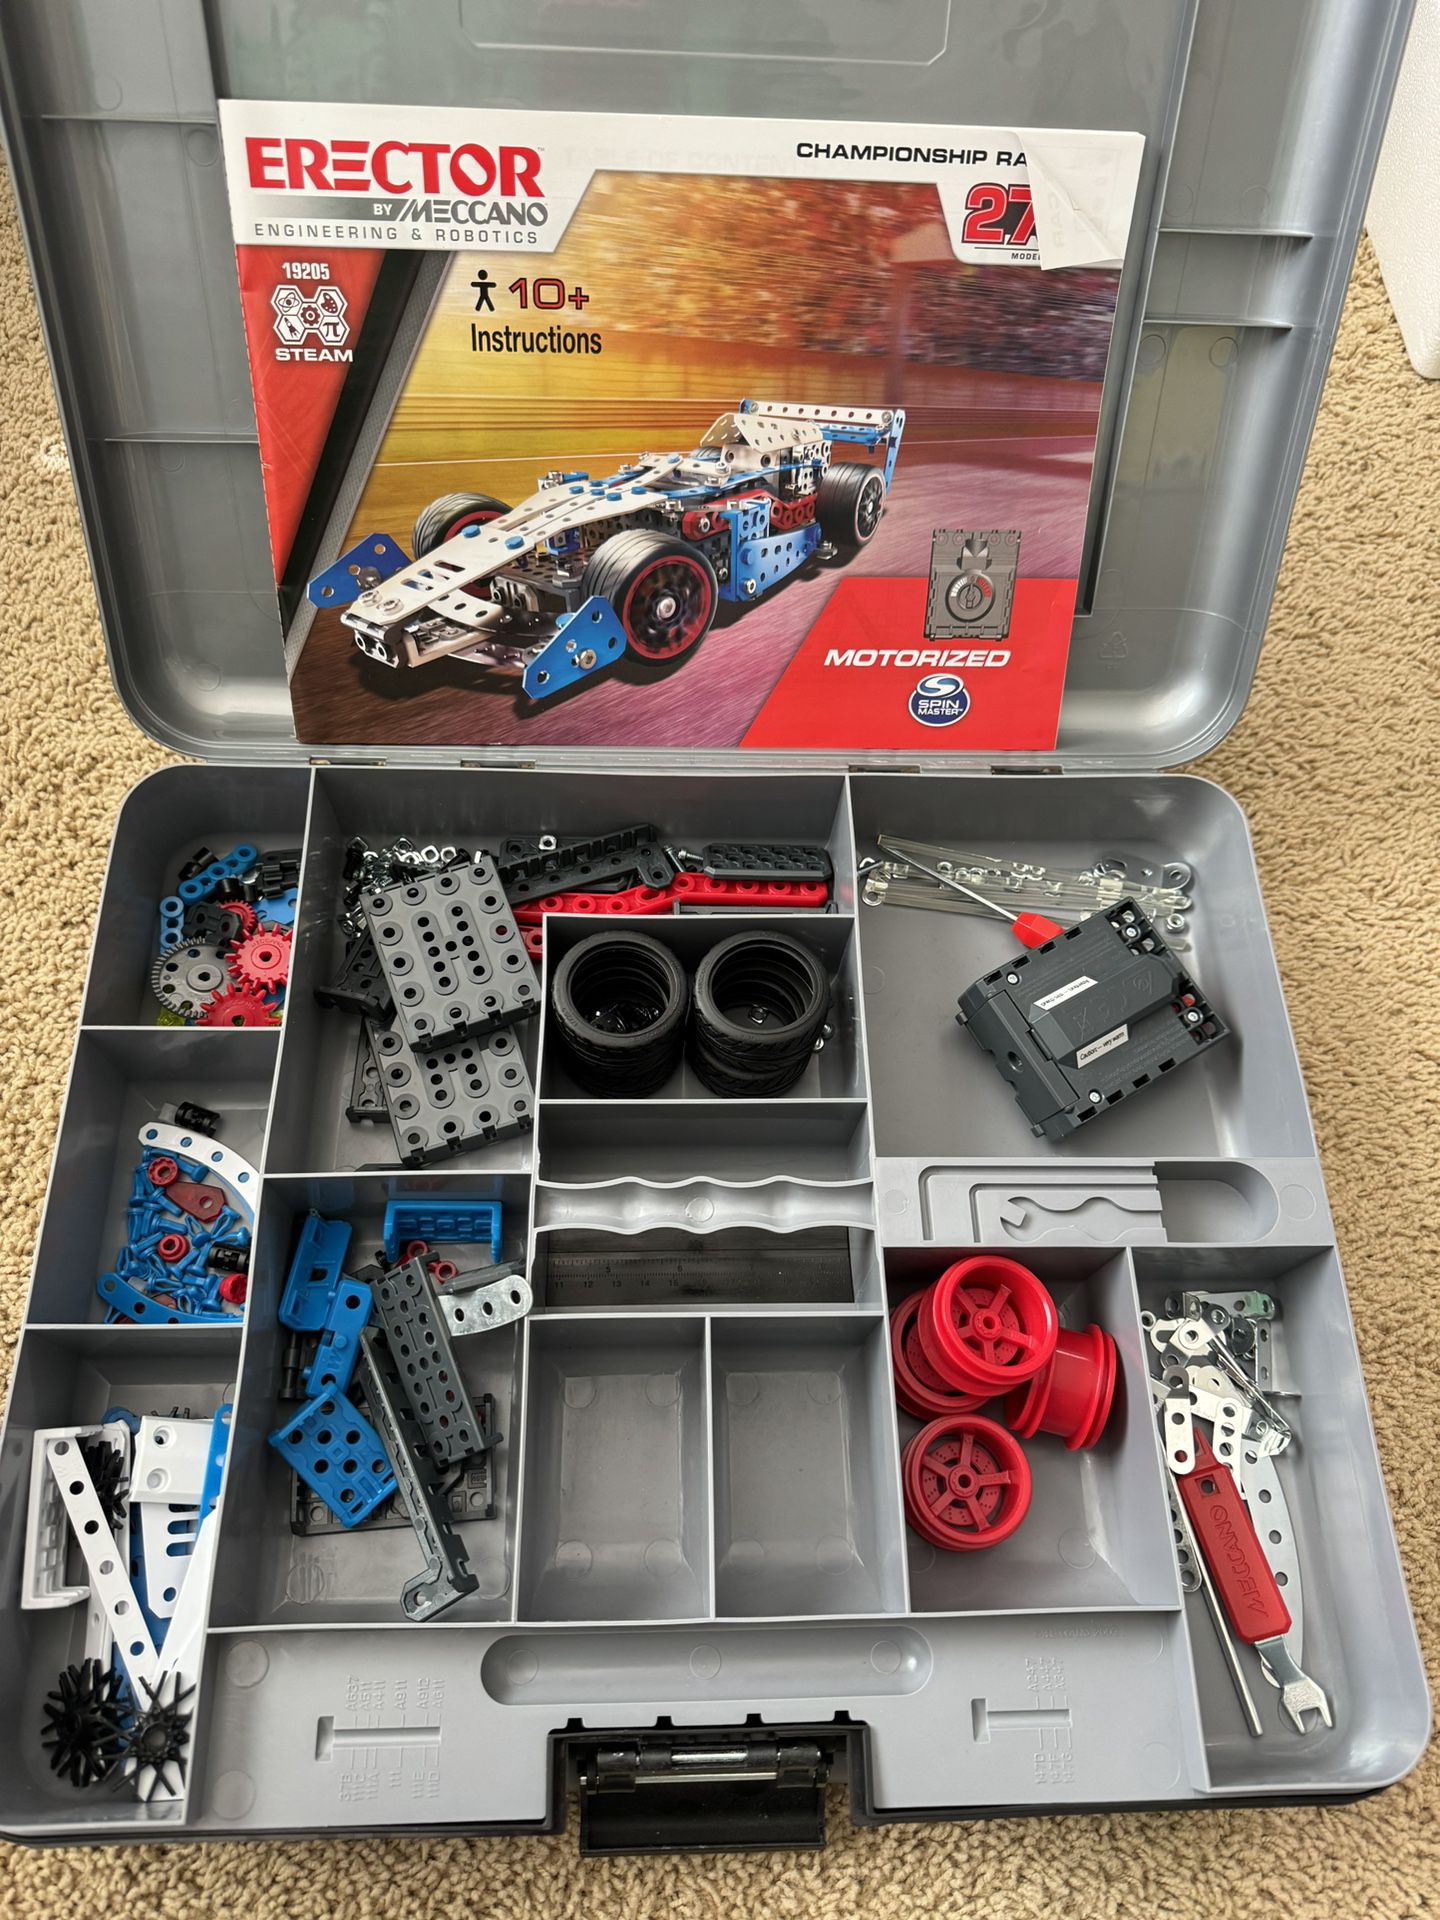 Erector By Meccano Championship Race Car Set And A Hexbug Catapult Launcher